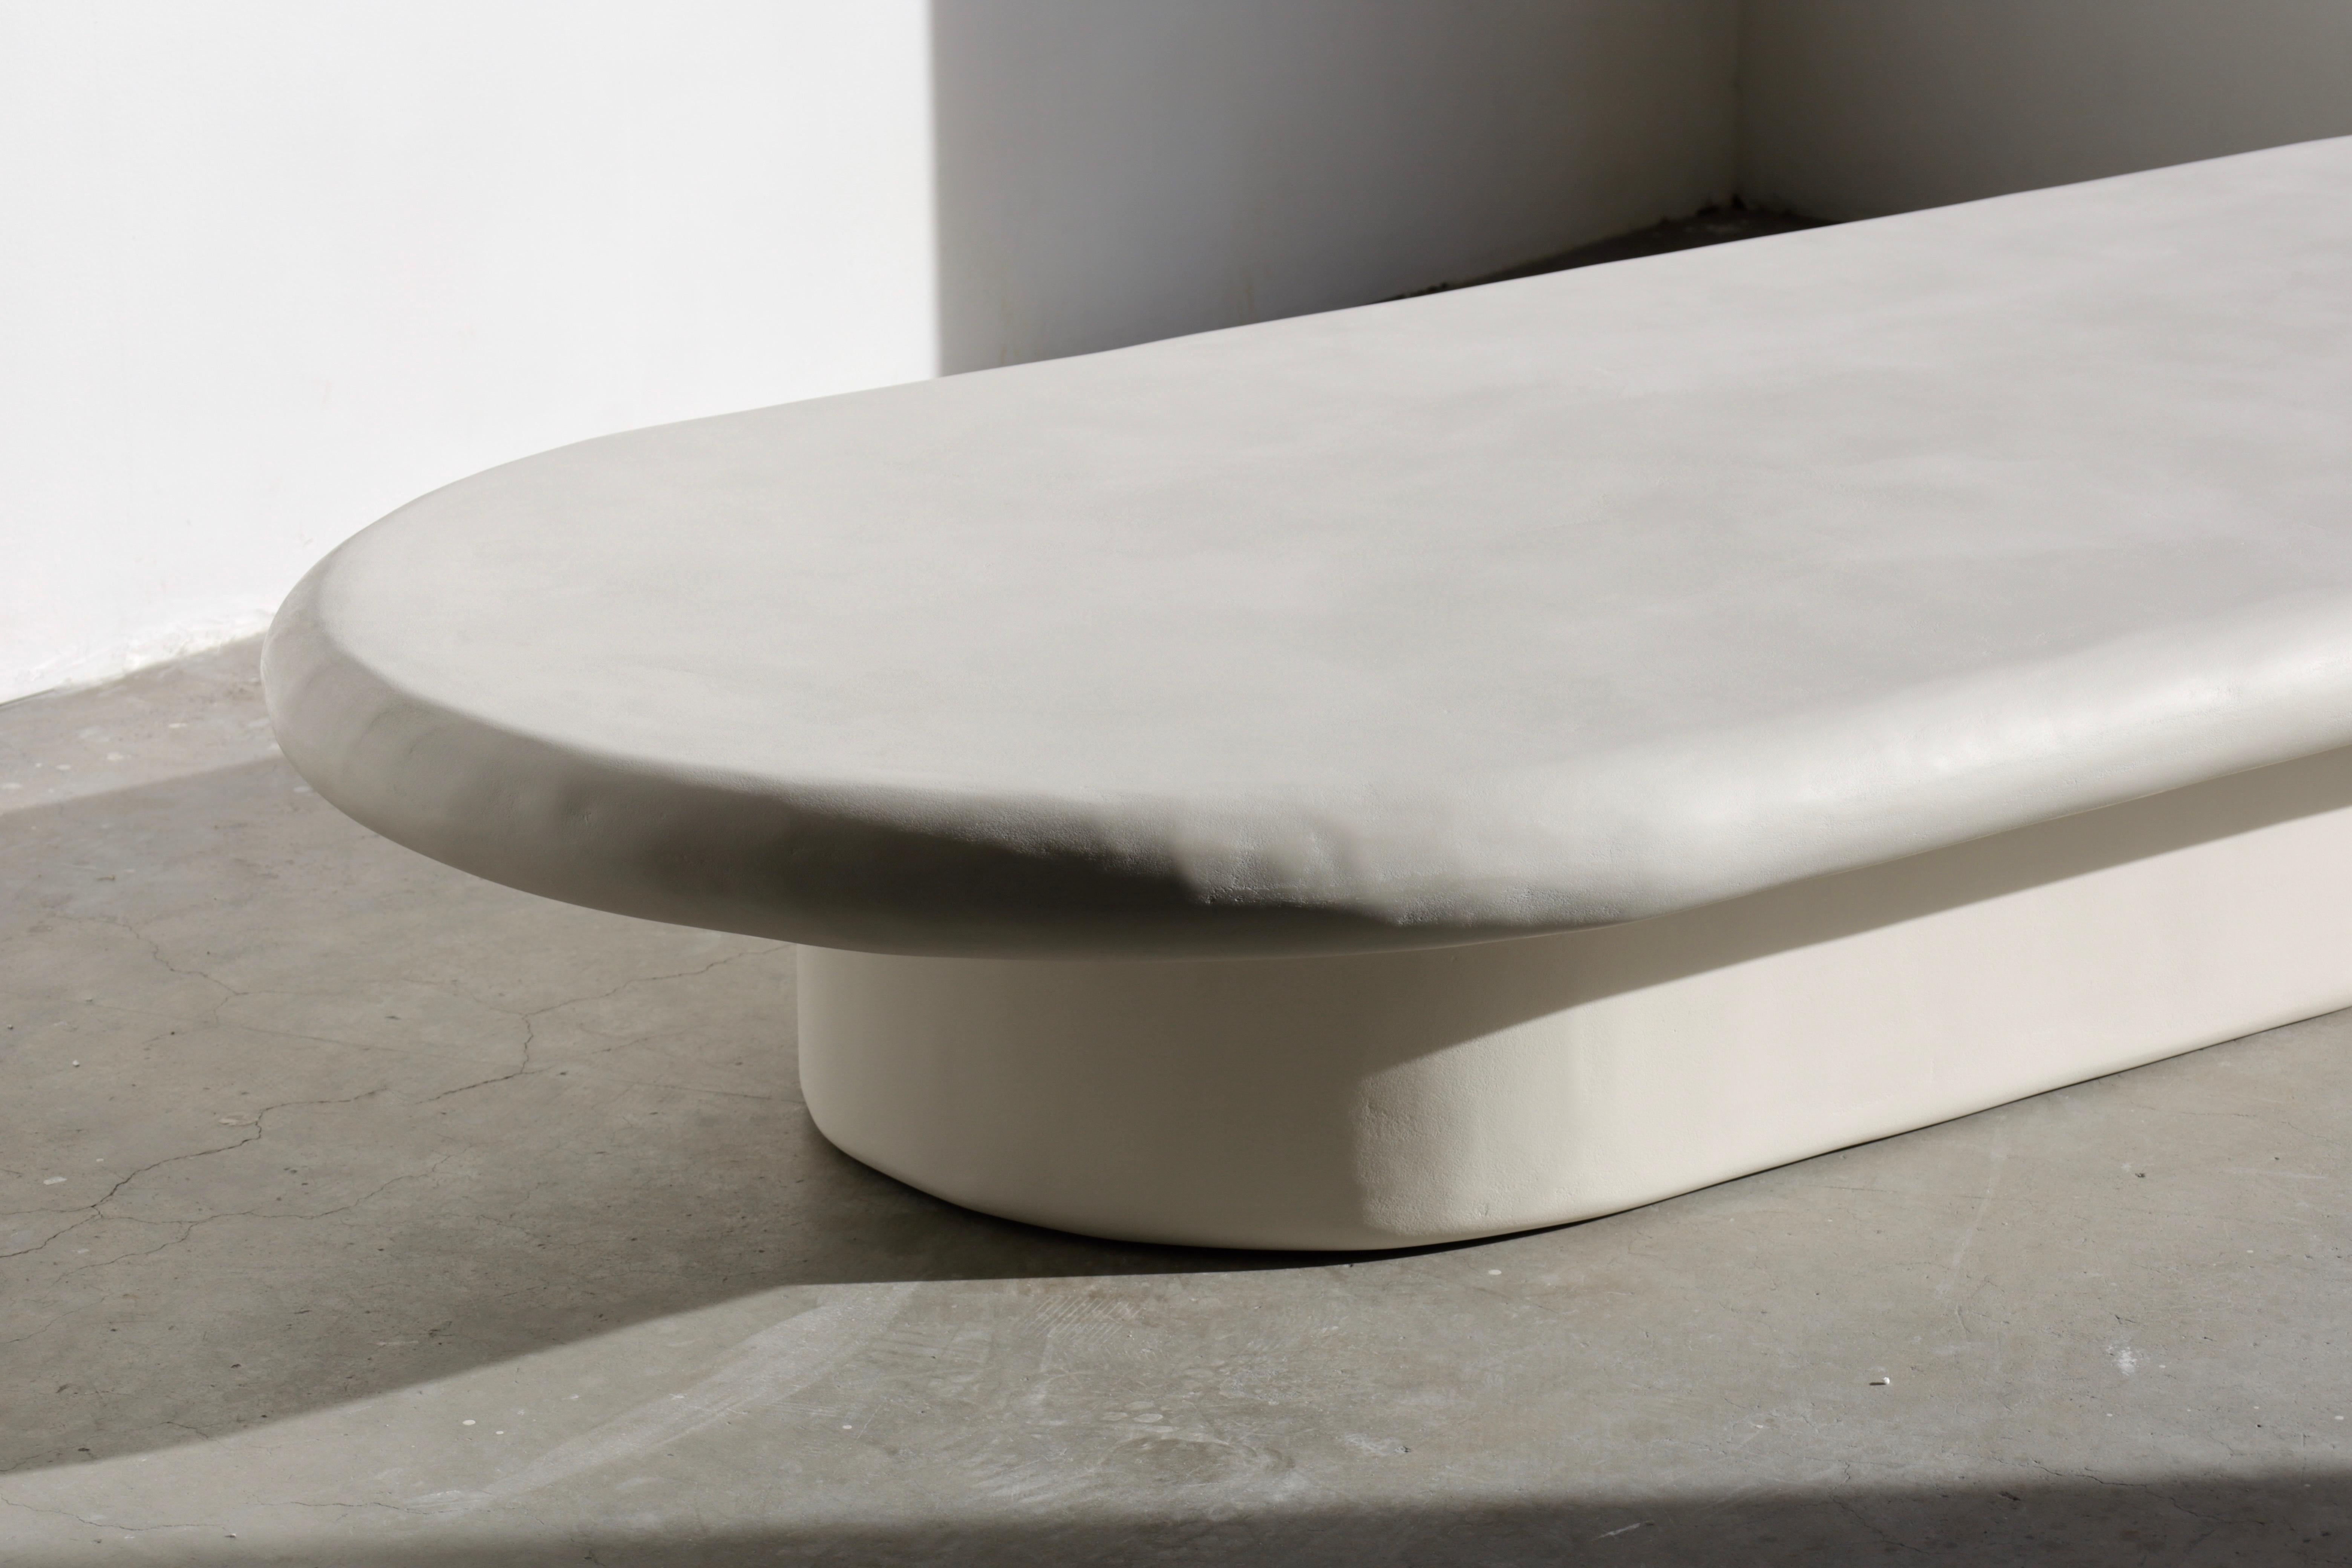 our most popular table, simple and sculptural statement piece. featured in light bone color.

each öken house studio piece is handmade & made to order by a small team of plaster artisans and we try to utilize local vendors as much as possible. 

we